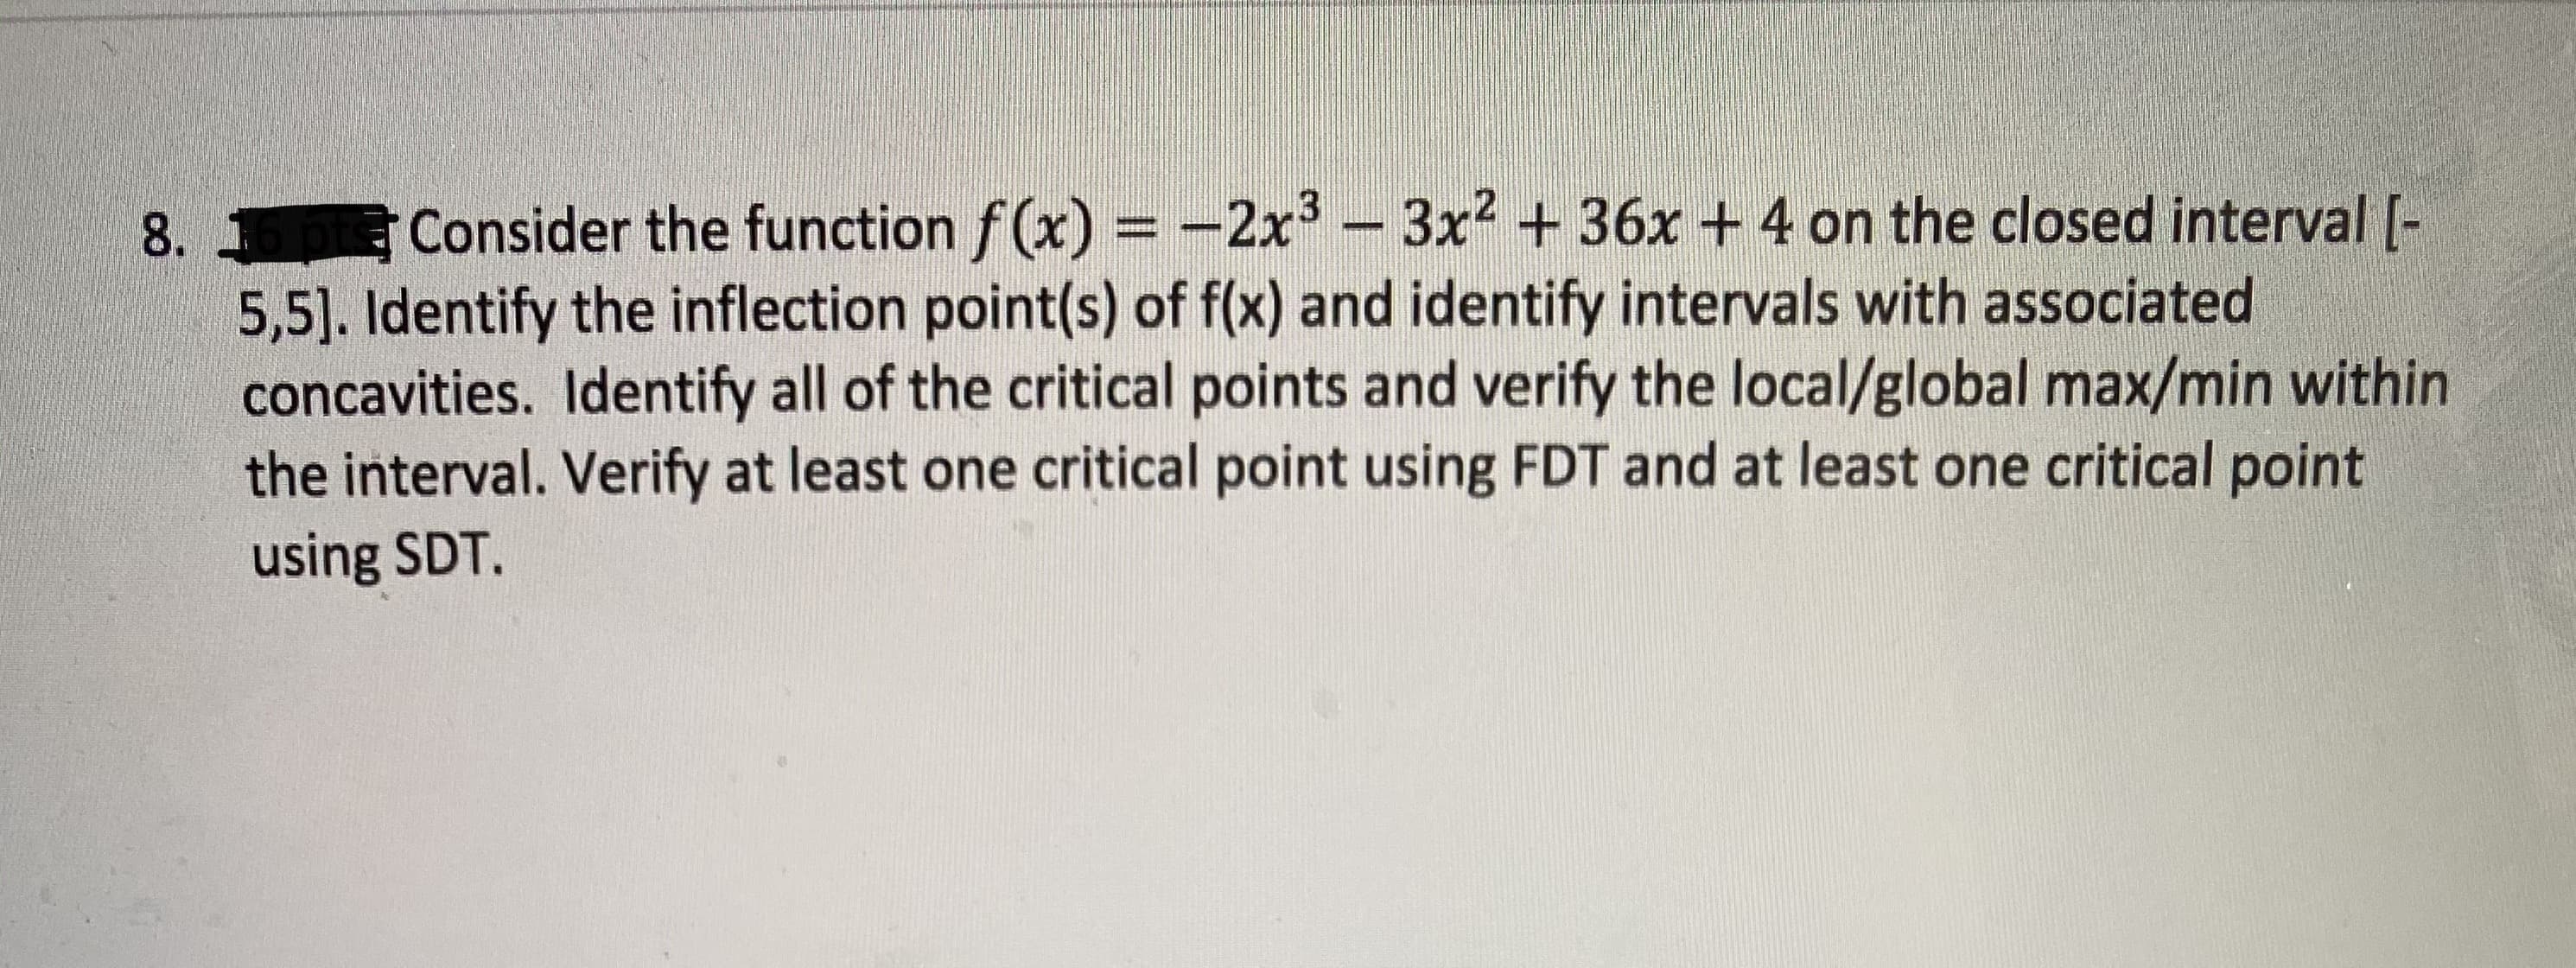 Consider the function f(x) = -2x -3x2 + 36x + 4 on the closed interval (-
5,5]. Identify the inflection point(s) of f(x) and identify intervals with associated
concavities. Identify all of the critical points and verify the local/global max/min within
the interval. Verify at least one critical point using FDT and at least one critical point
using SDT.
